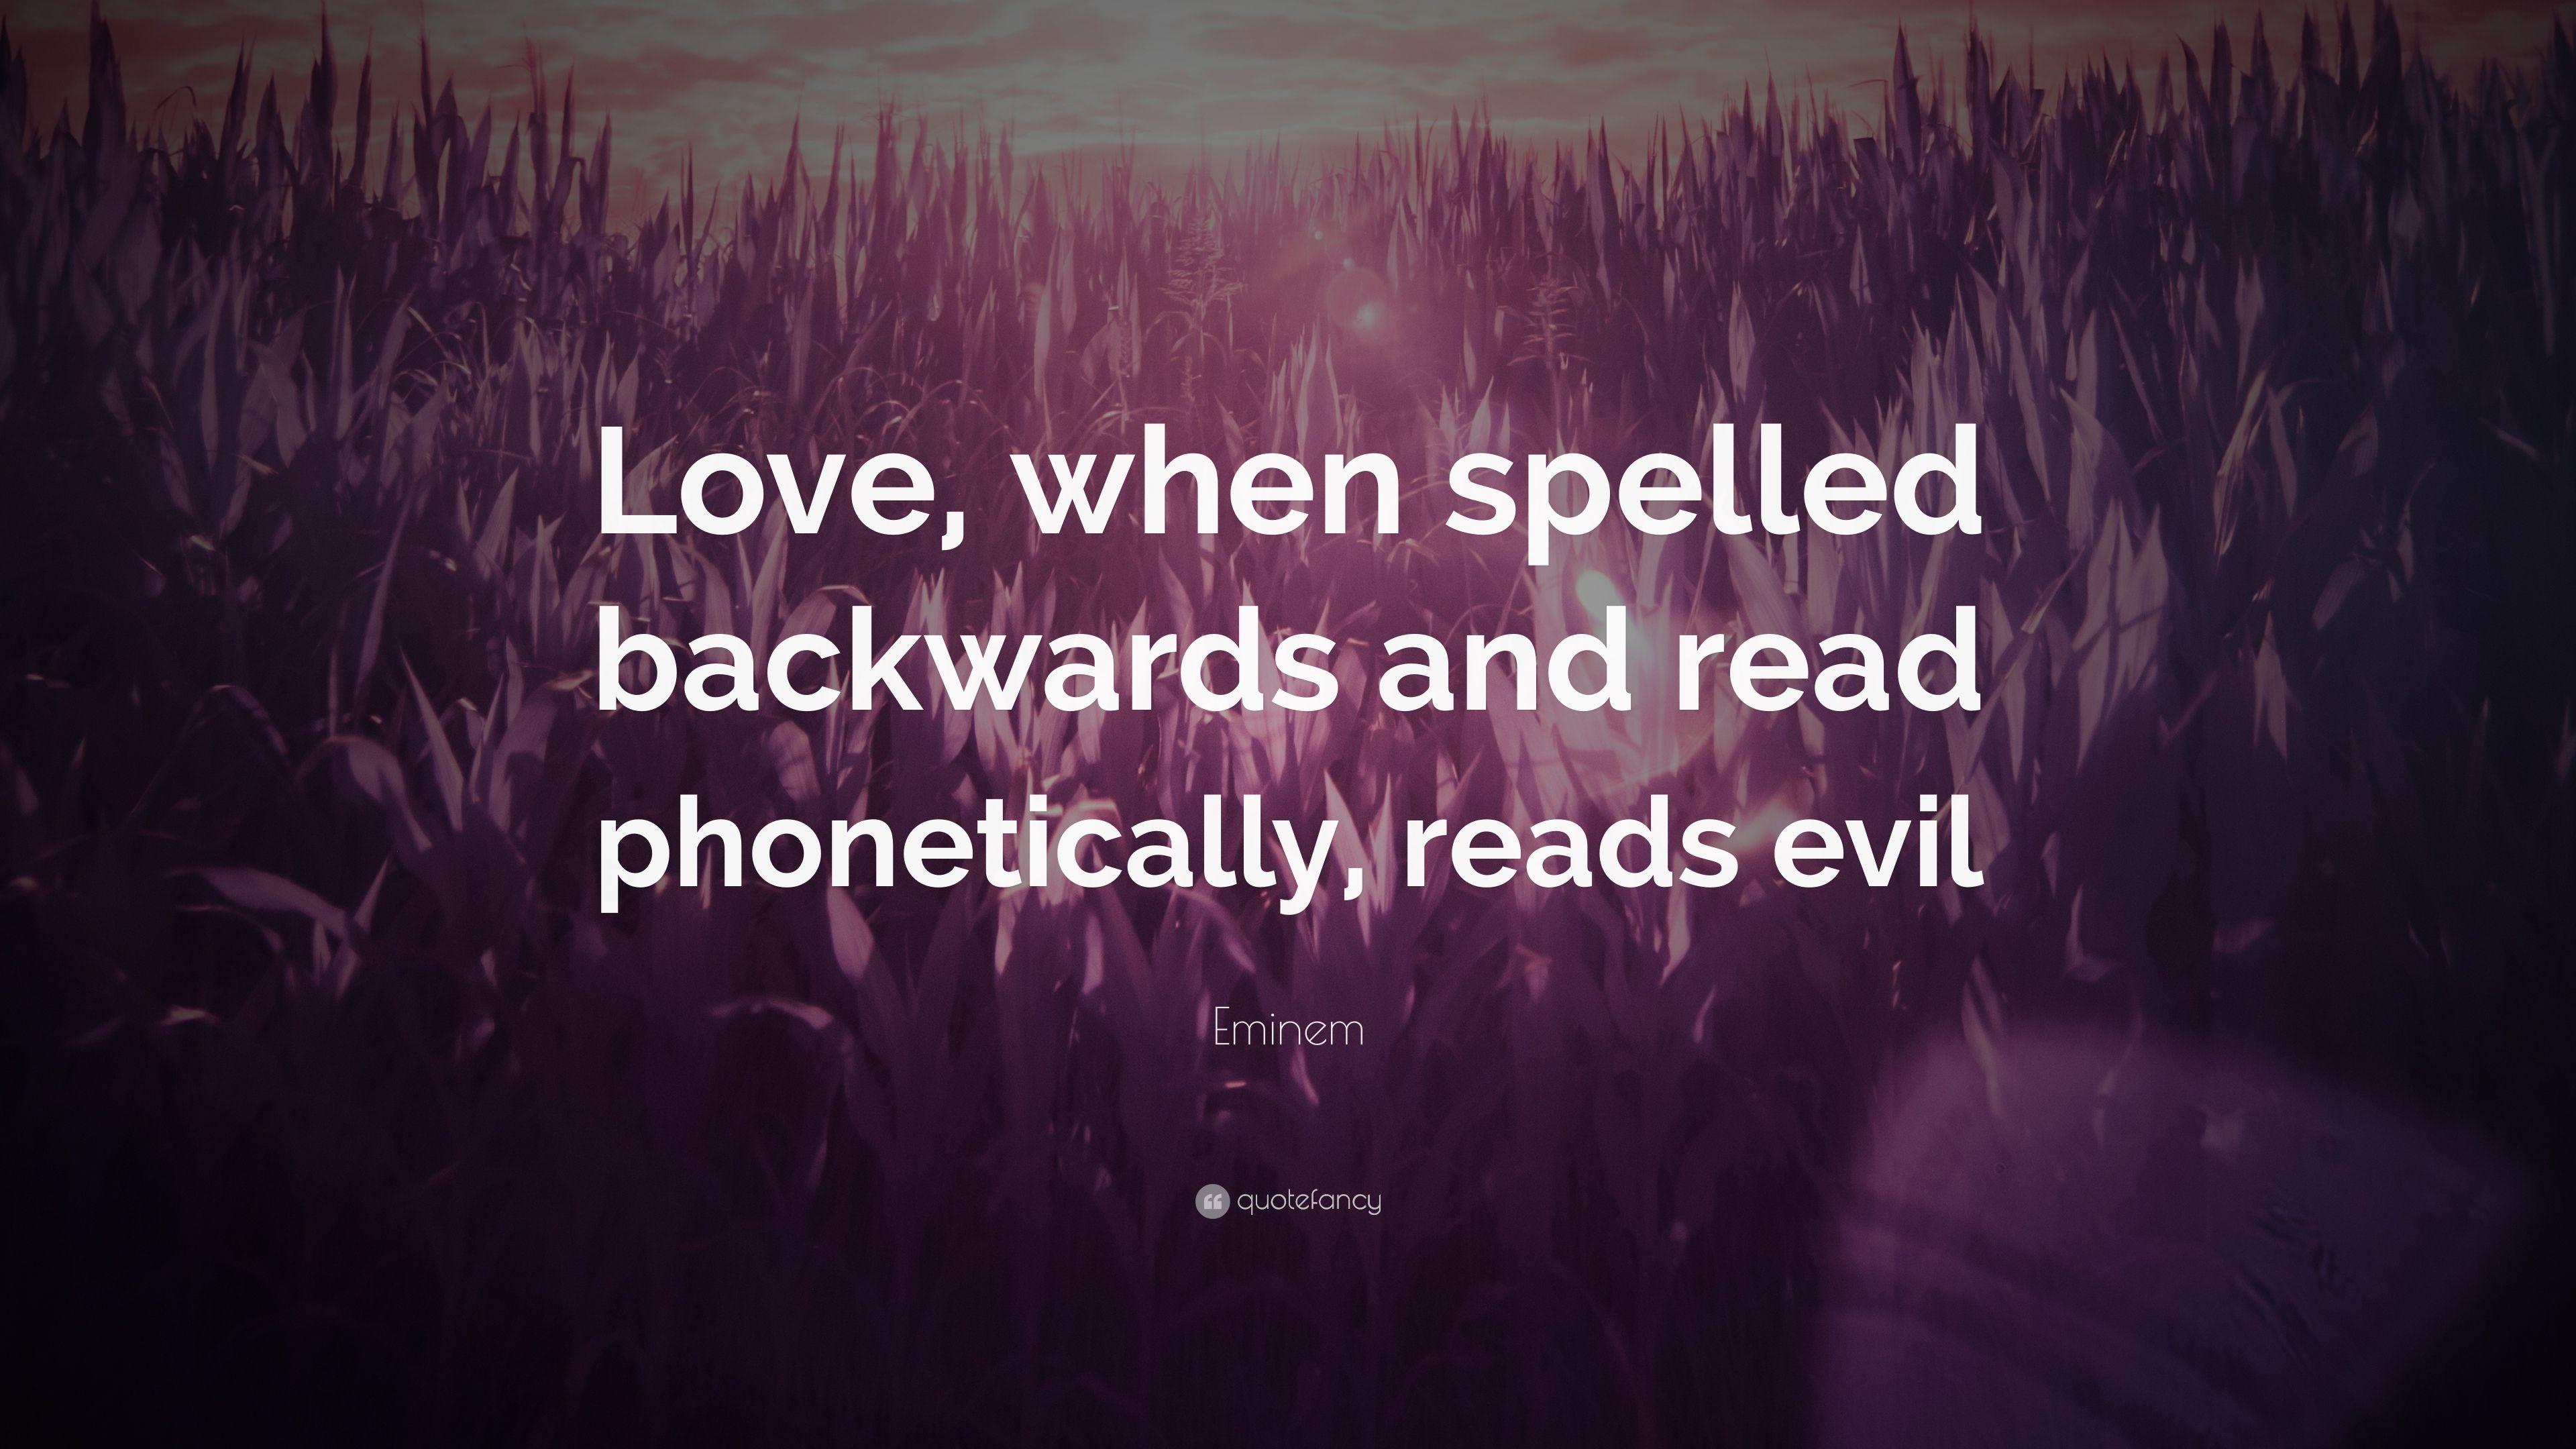 Eminem Quote: “Love, when spelled backwards and read phonetically